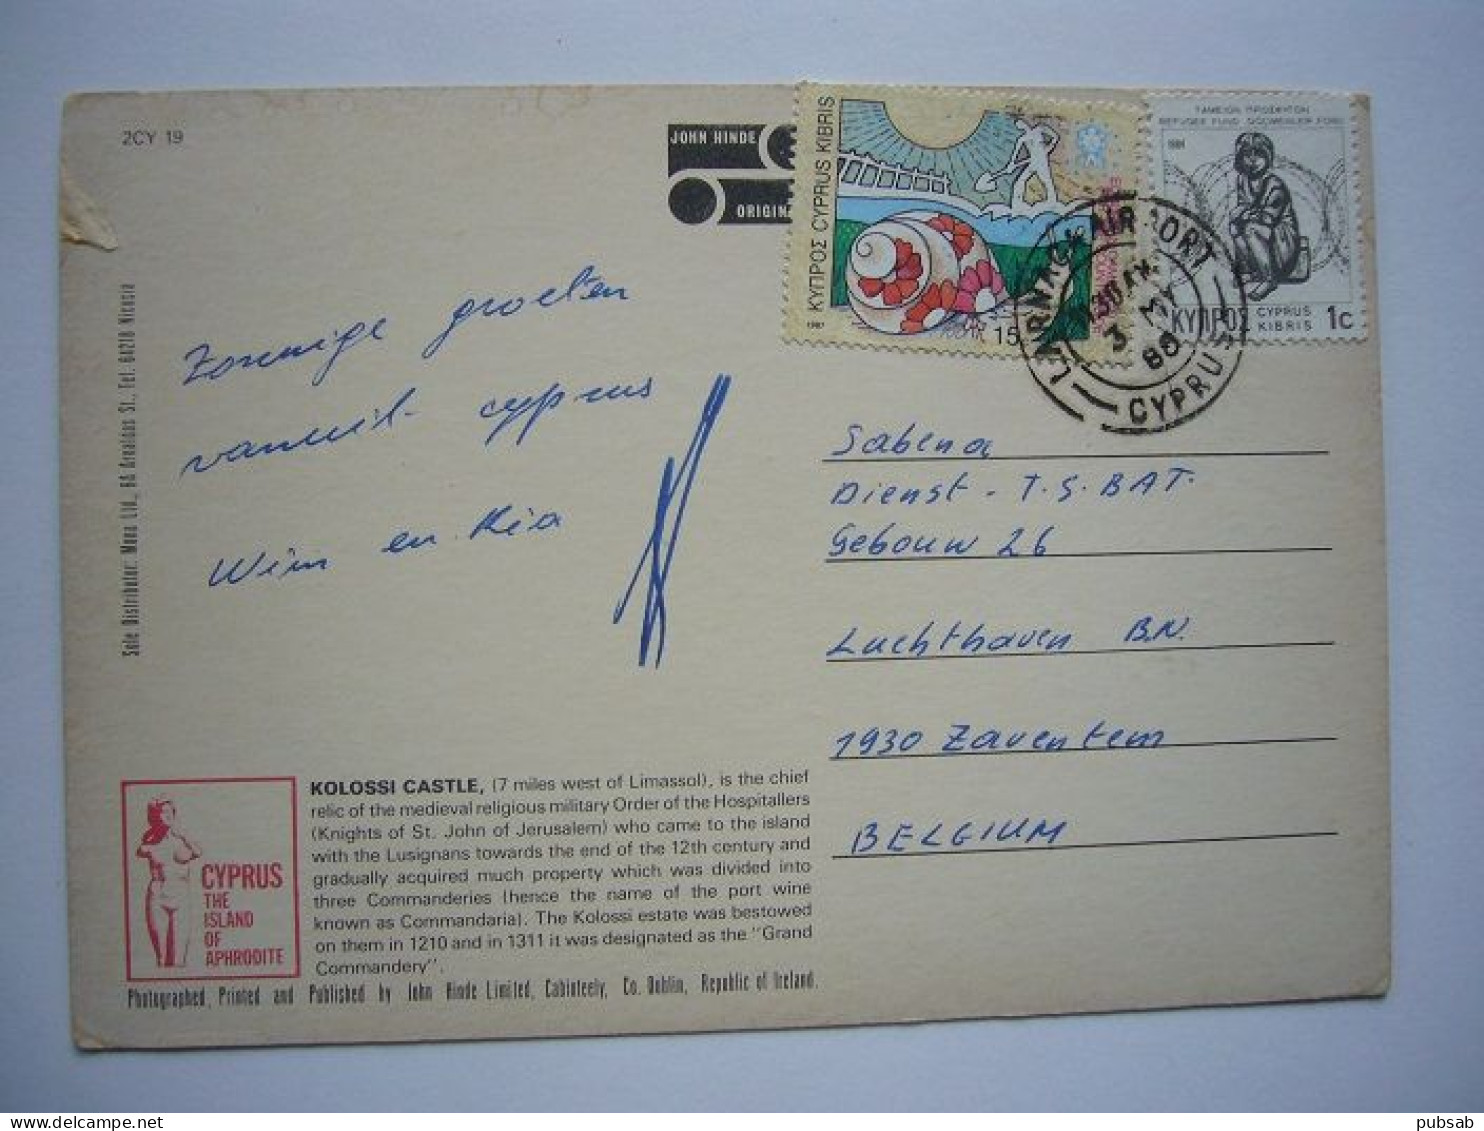 Avion / Airplane / Card From Larnaka Airport, Cyprus To Zaventem Airport / May 3,1980 - Covers & Documents